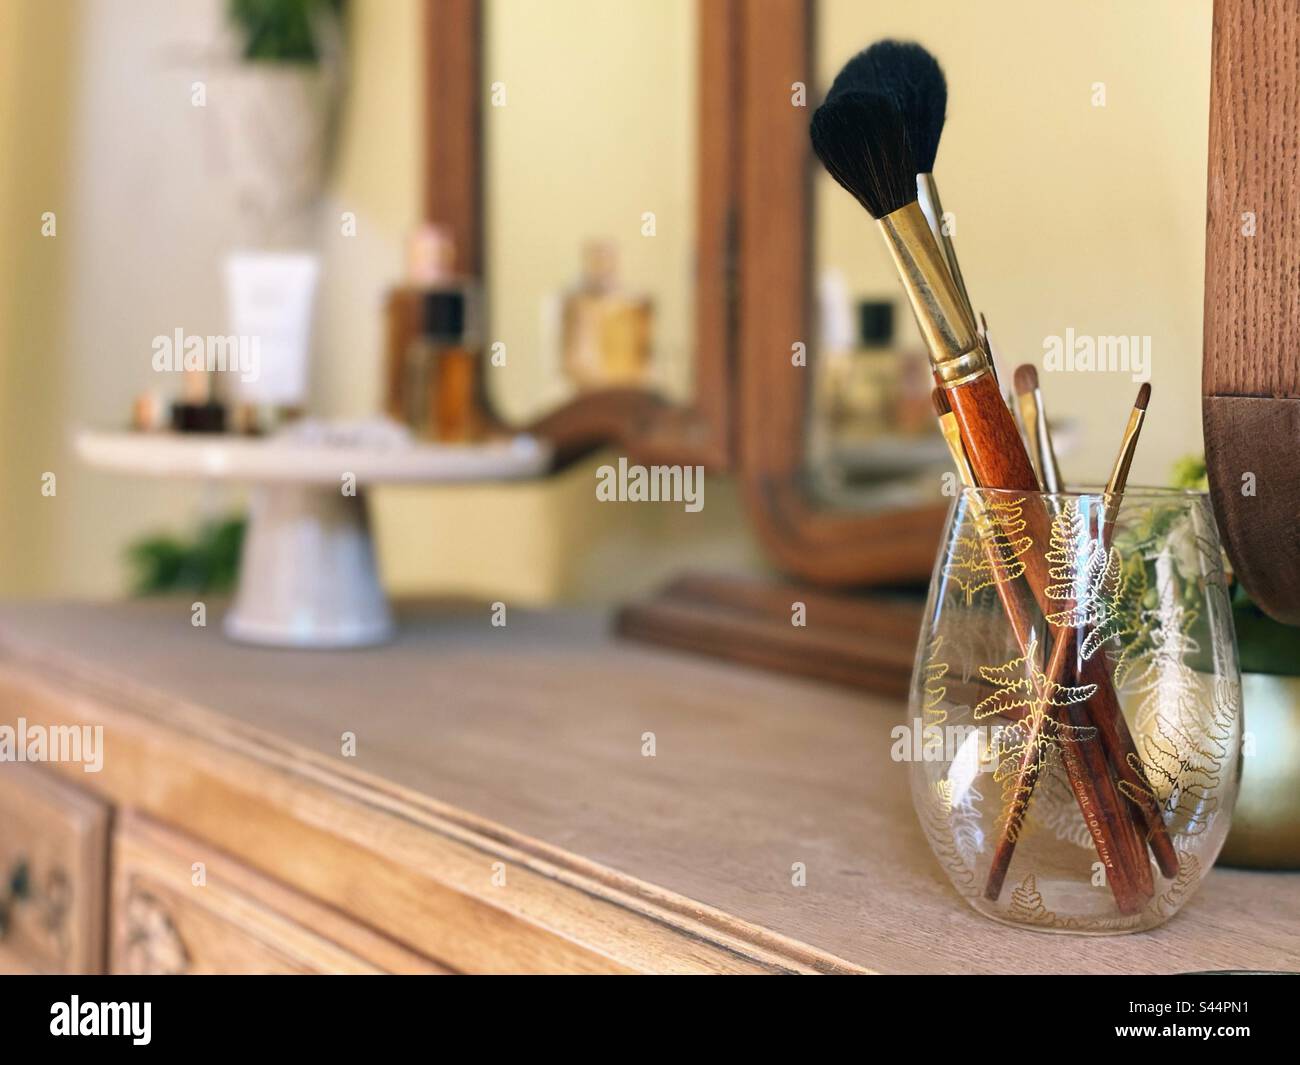 Makeup brushes in a glass on a vanity table Stock Photo